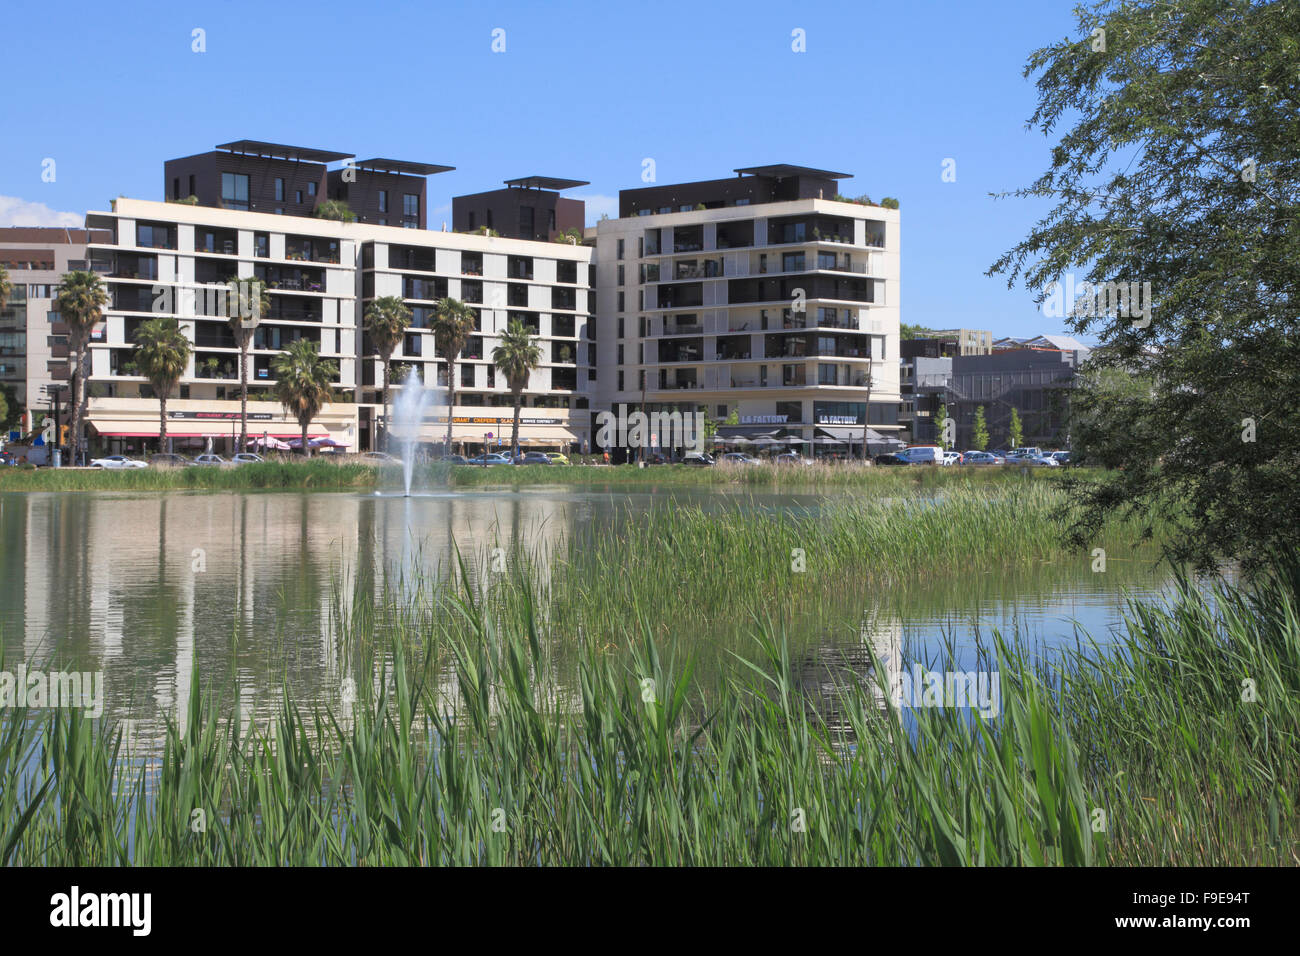 France, Languedoc-Roussillon, Montpellier, Bassin Jacques Coeur, architettura moderna, Foto Stock